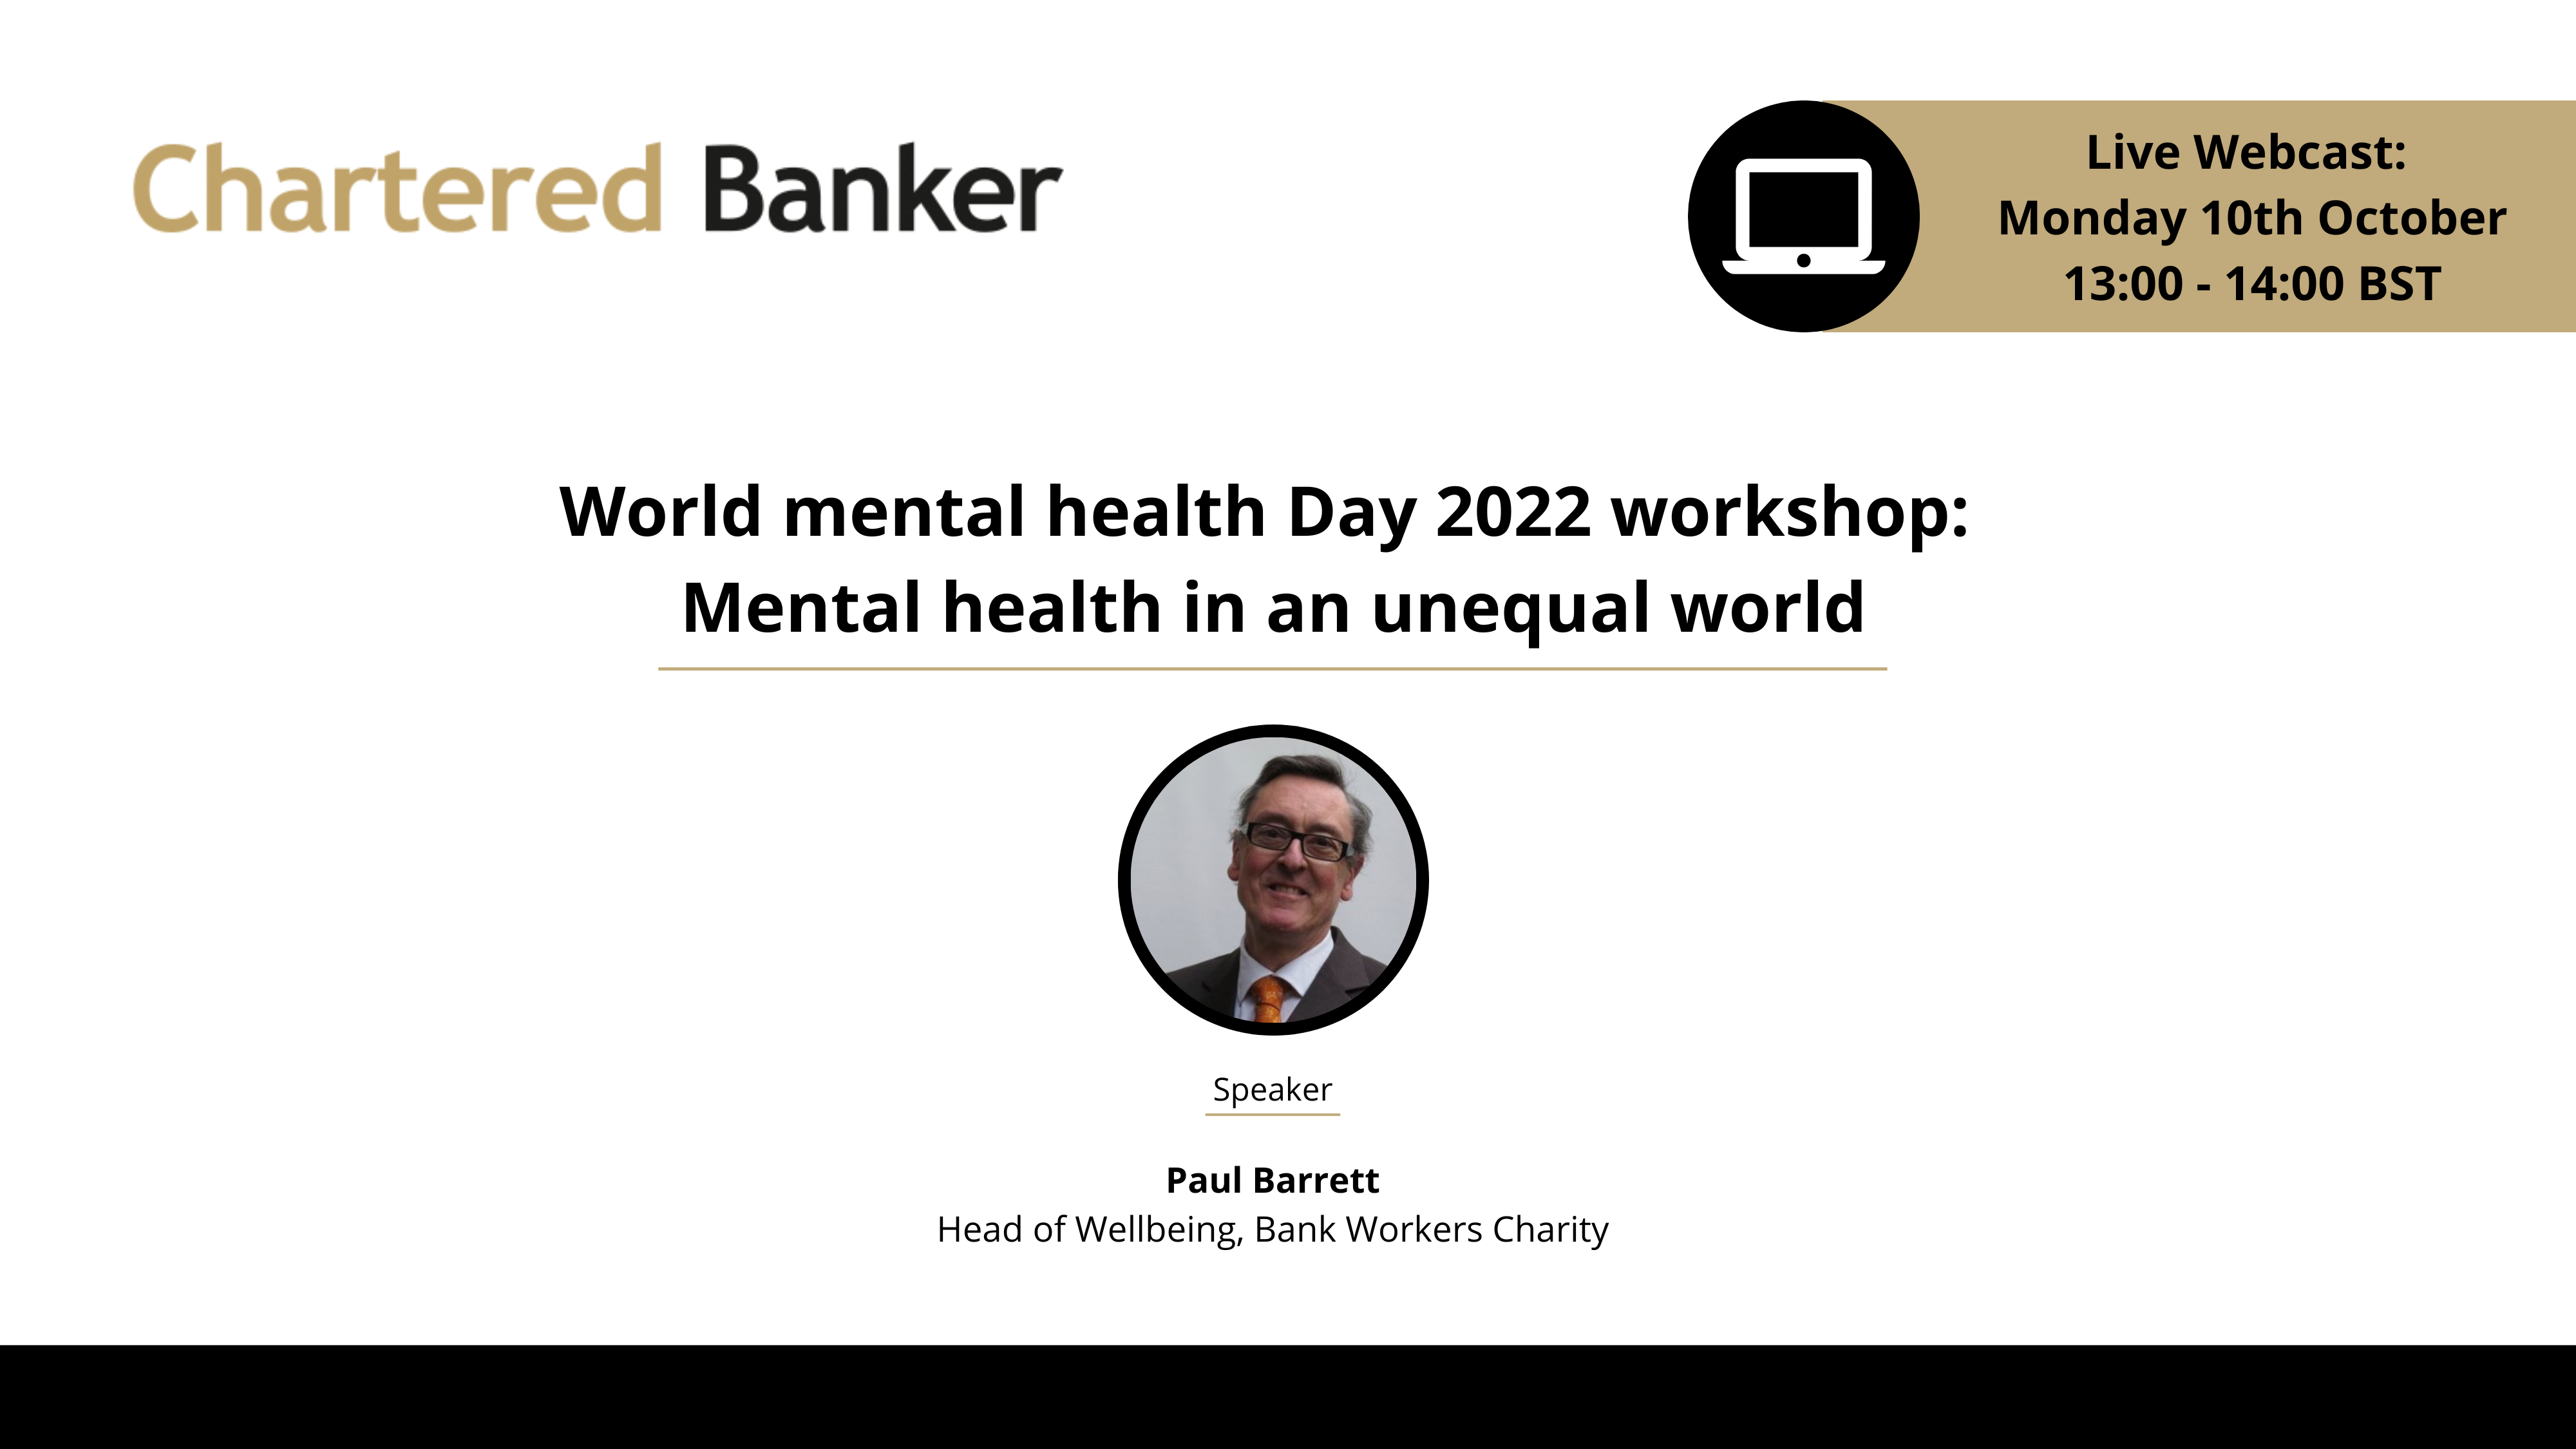 World mental health Day 2022 workshop: Mental health in an unequal world